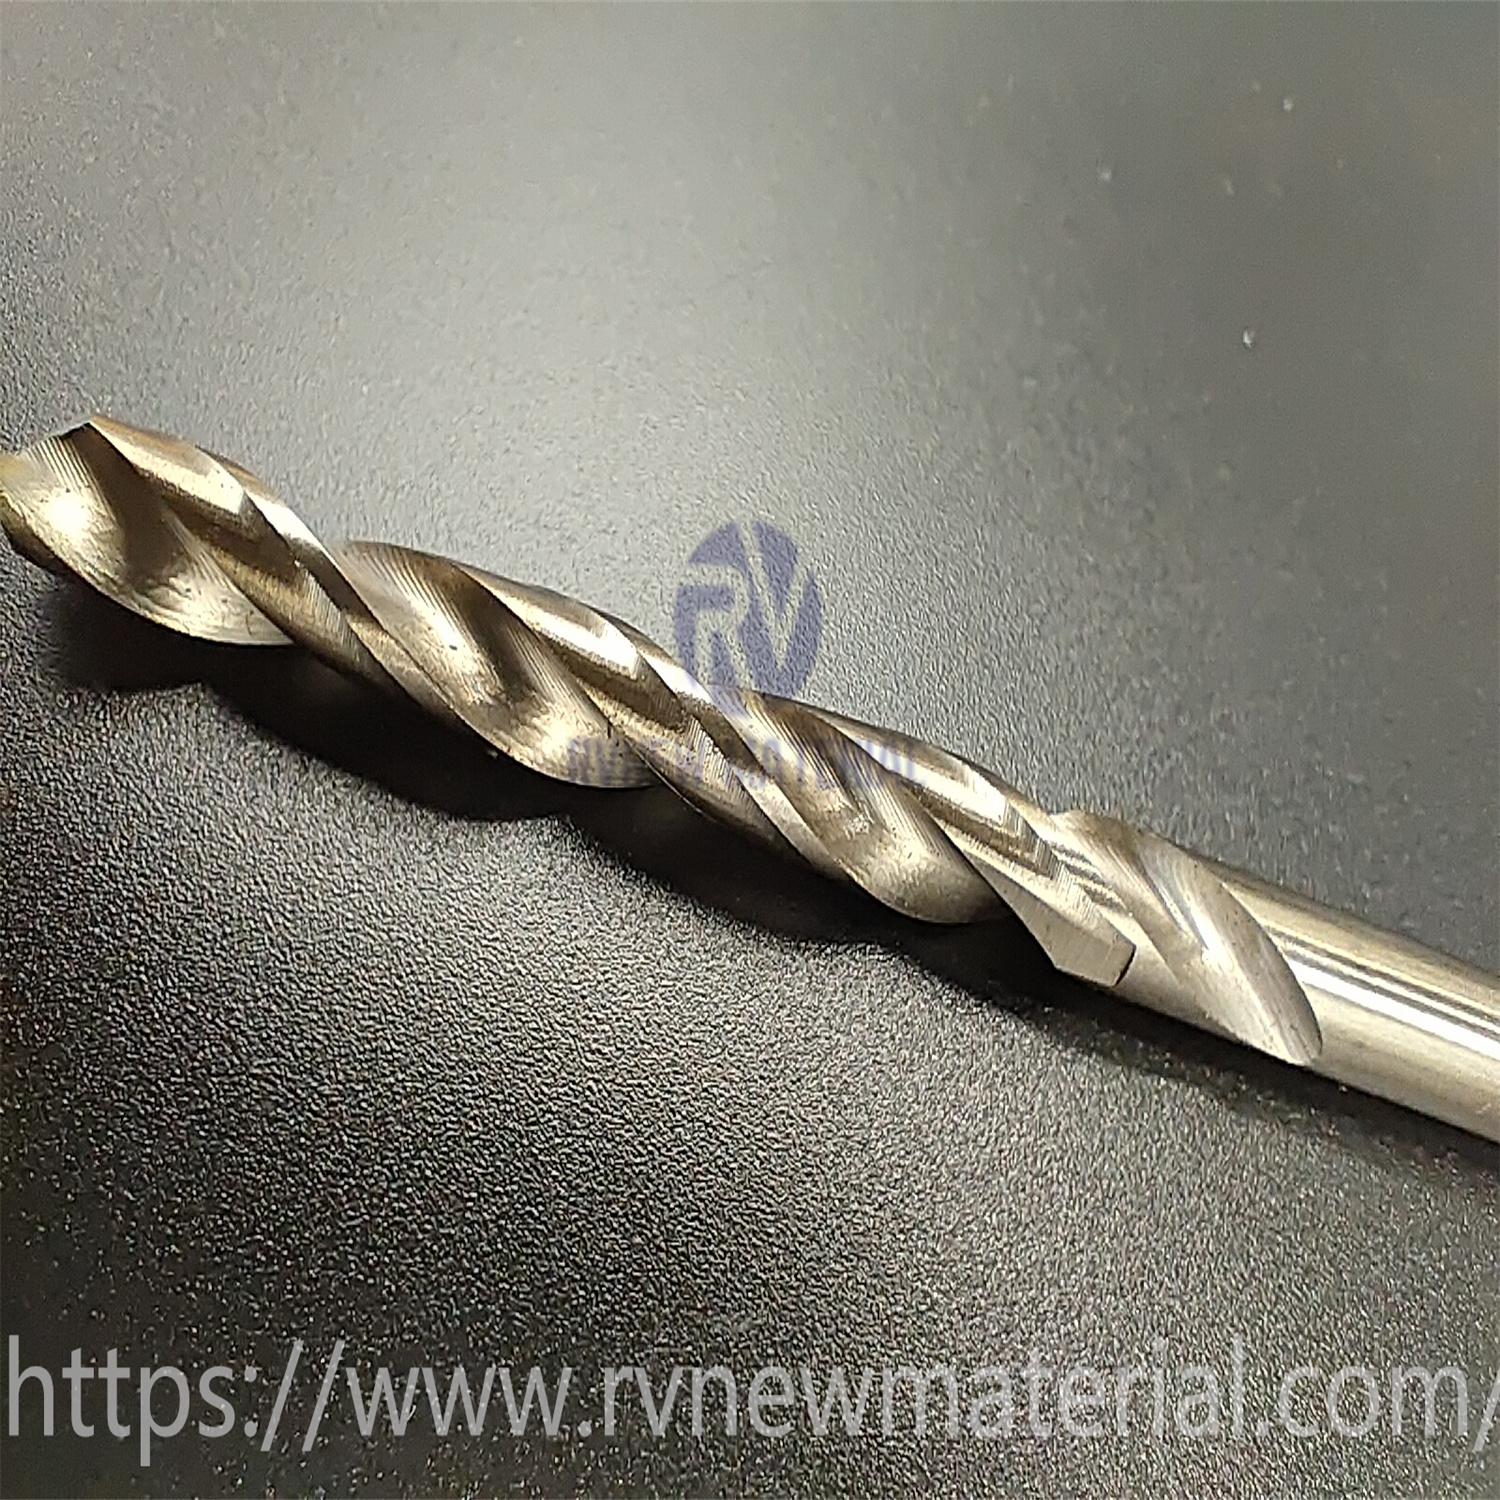 5mm M42 Co8 Accurate Positioning HSS Twist Drill Bit for Drilling Aluminium Alloy